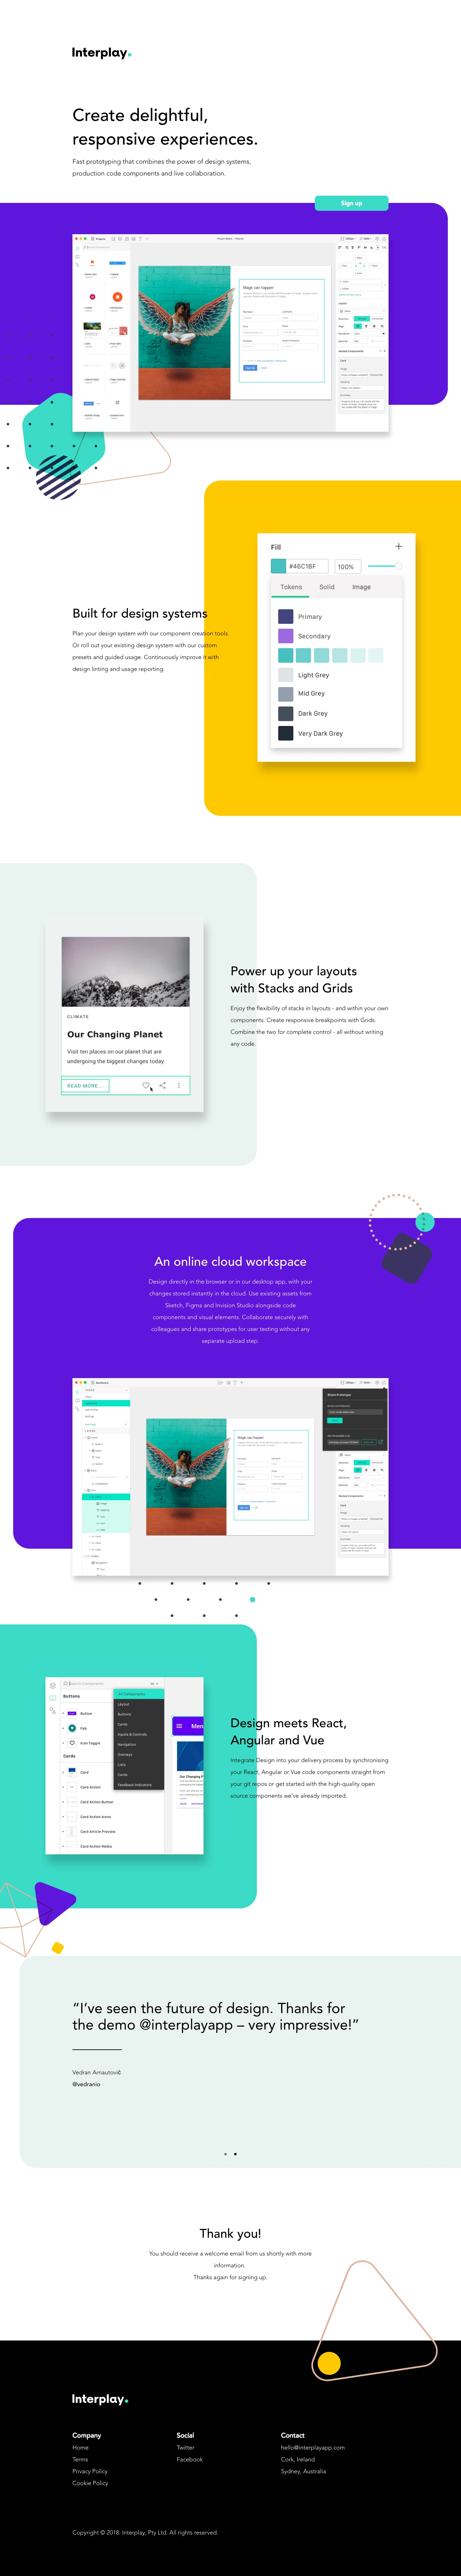 Interplay Landing Page Example: Fast prototyping that combines the power of design systems, production code components and live collaboration